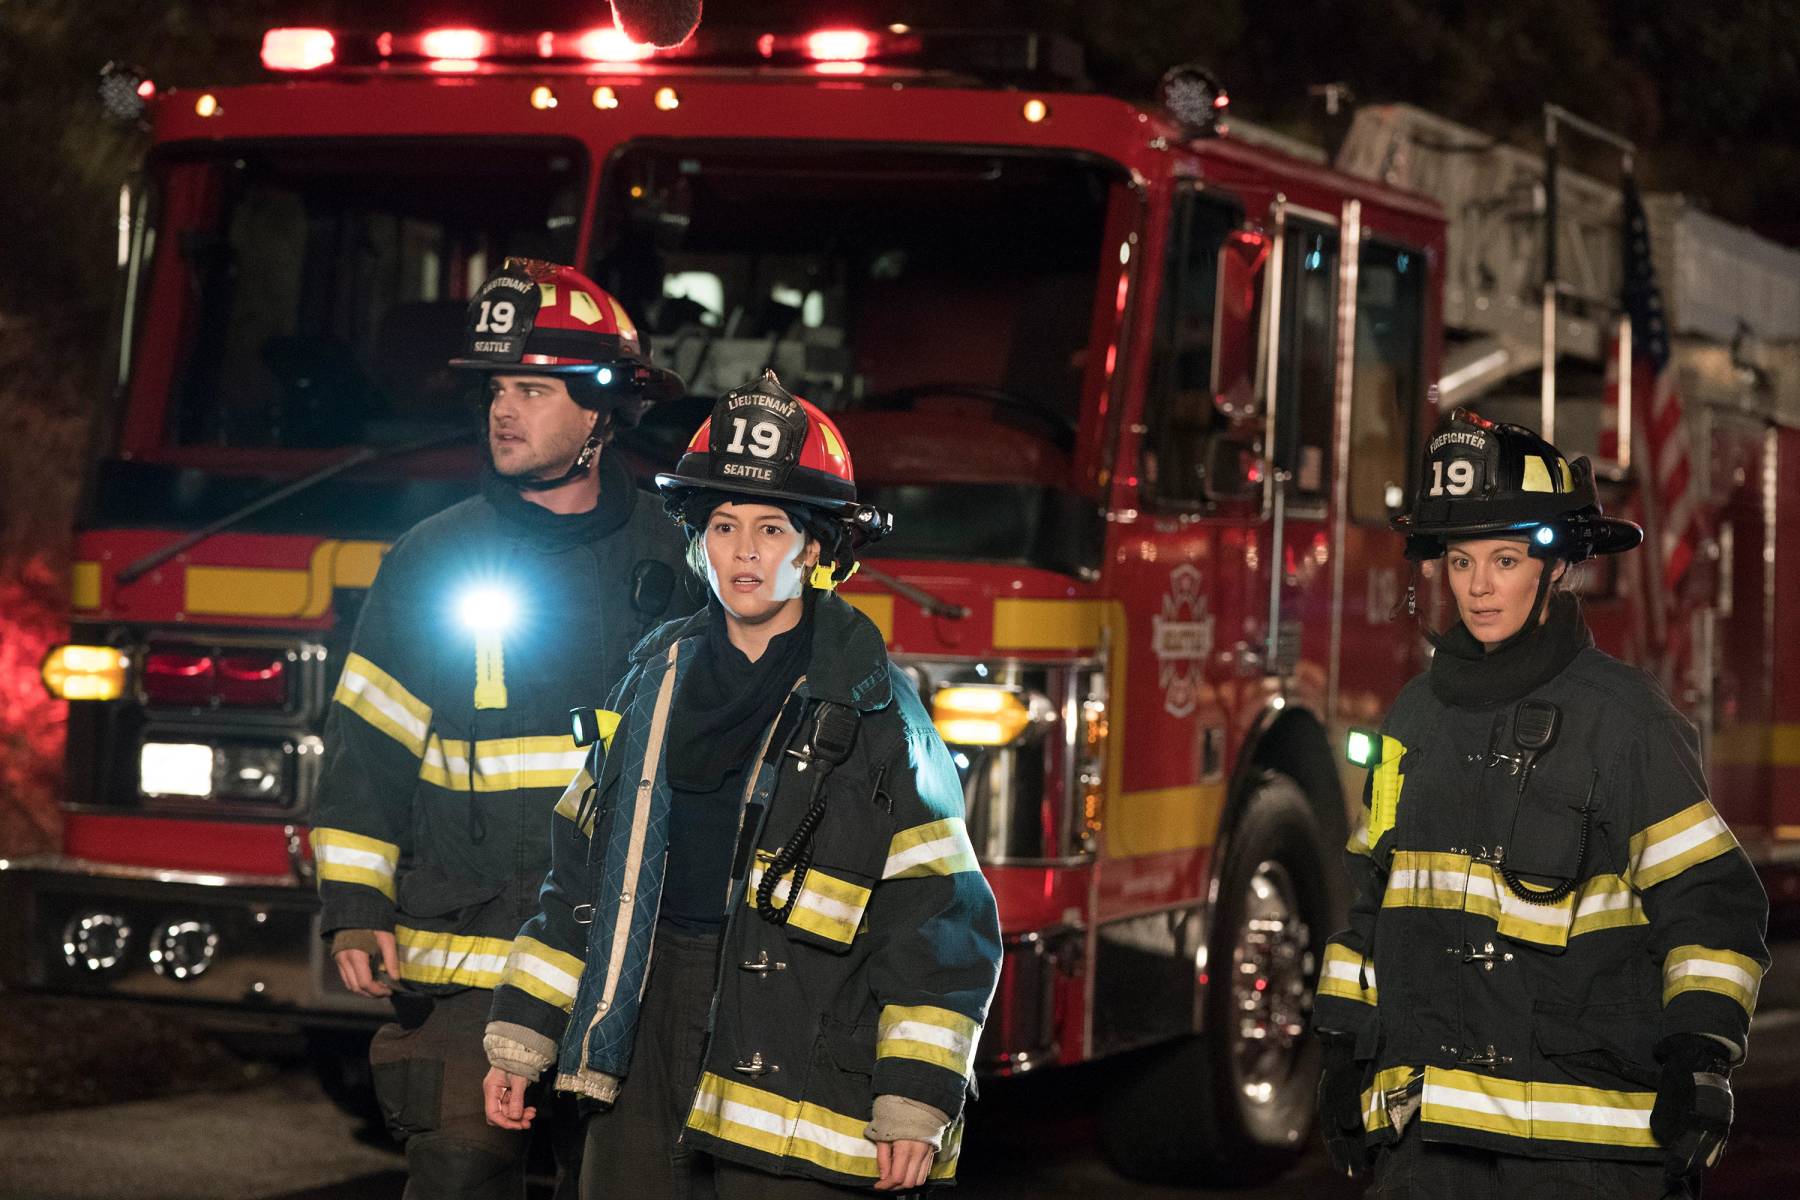 Station 19 Season 6 Episode 4 Release Date & Streaming Guide